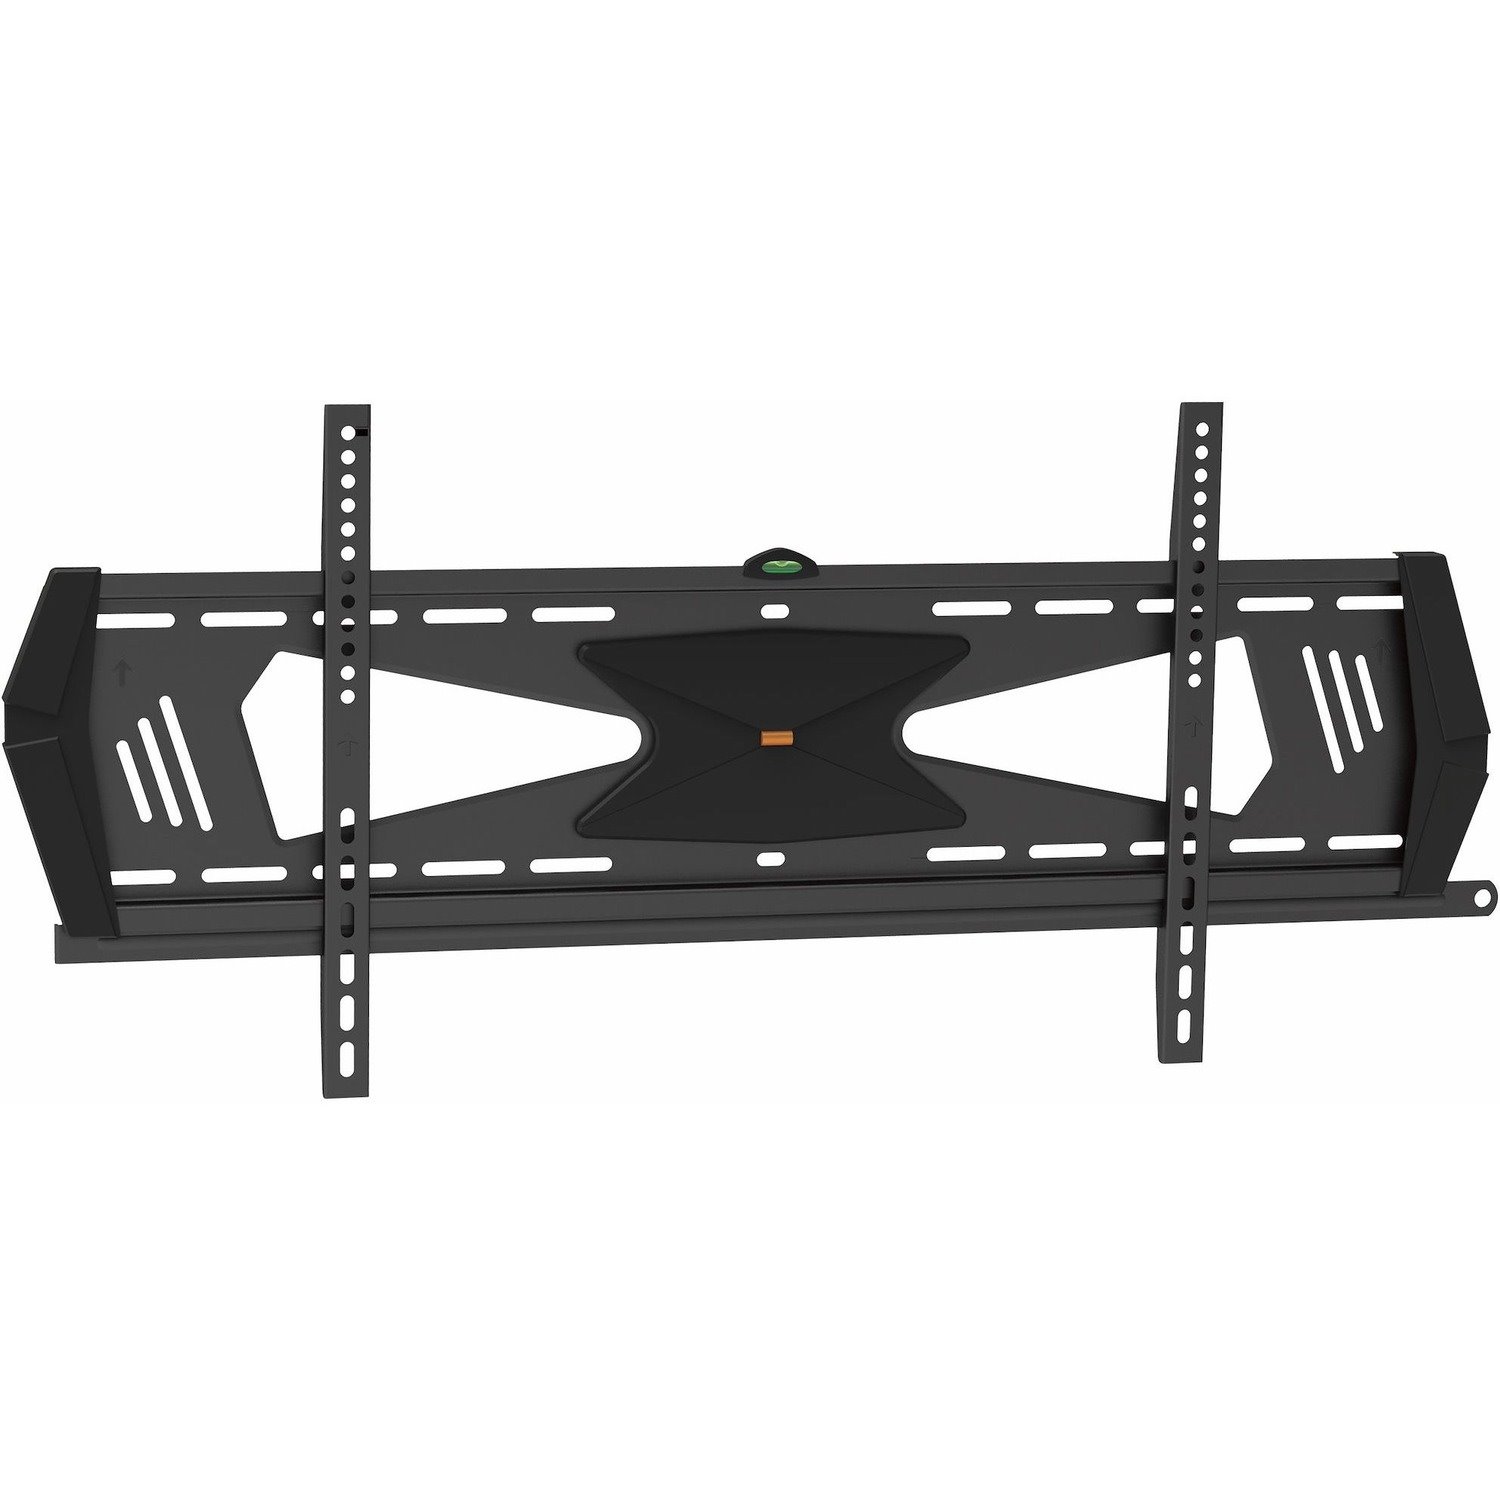 StarTech.com Wall Mount for TV, Monitor, LCD Display, LED Display, Flat Panel Display, Curved Screen Display - Black